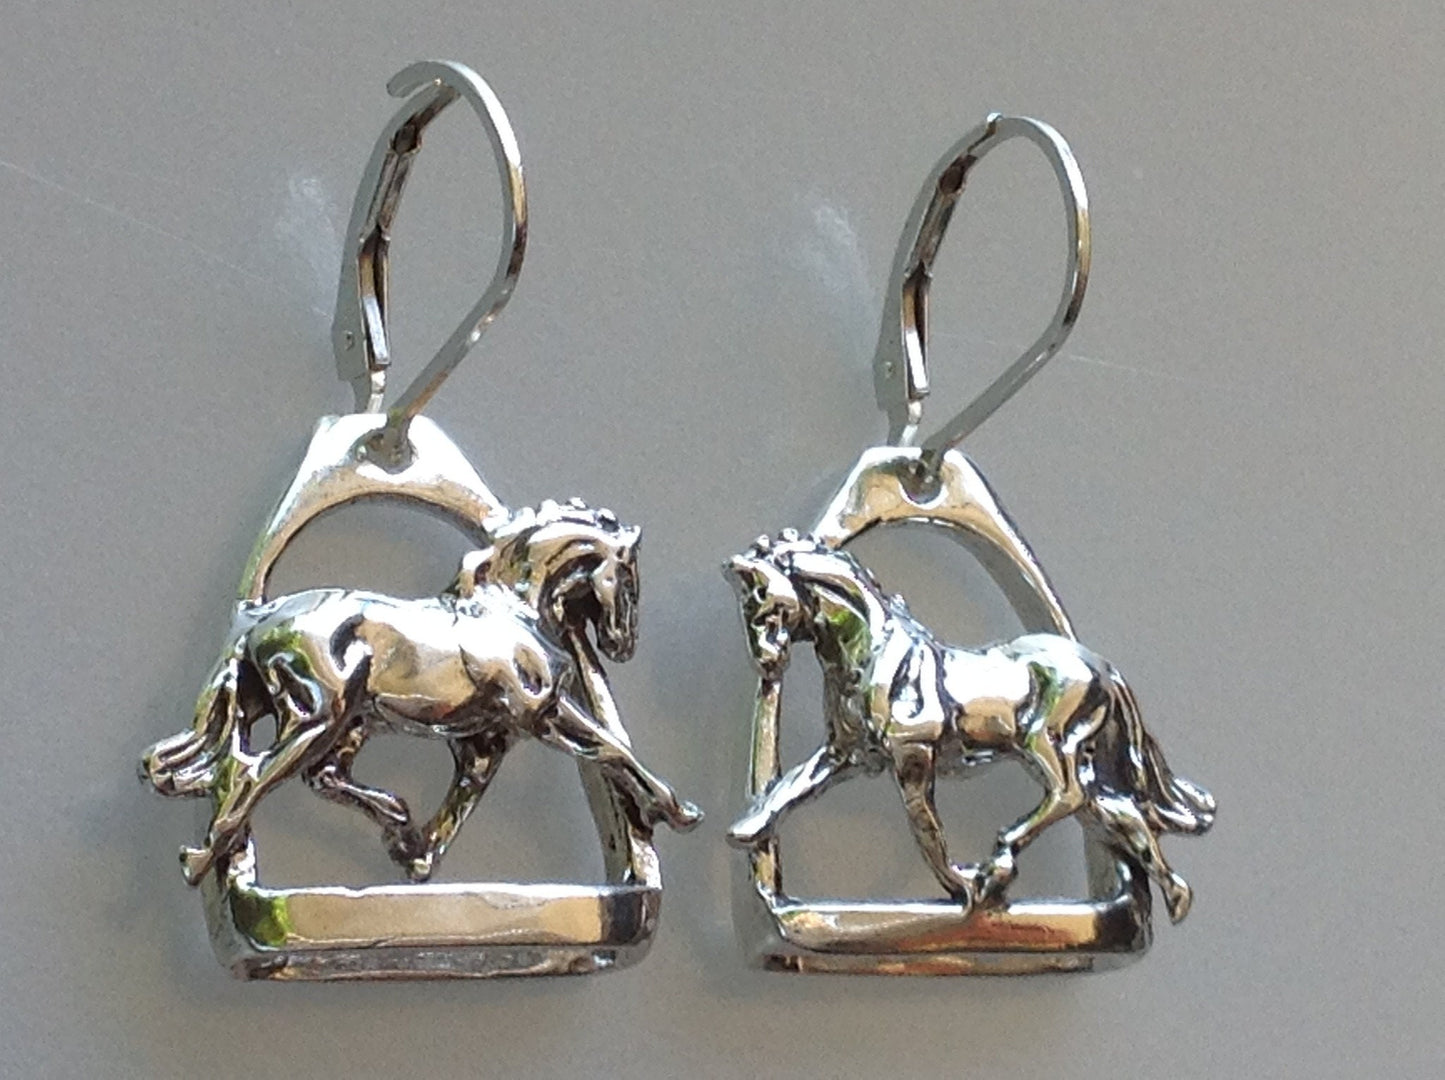 Stirrup and Trotting HORSE earrings STERLING SILVER Interchangeable lever backs  Forge Hill Sculpture  Jewelry